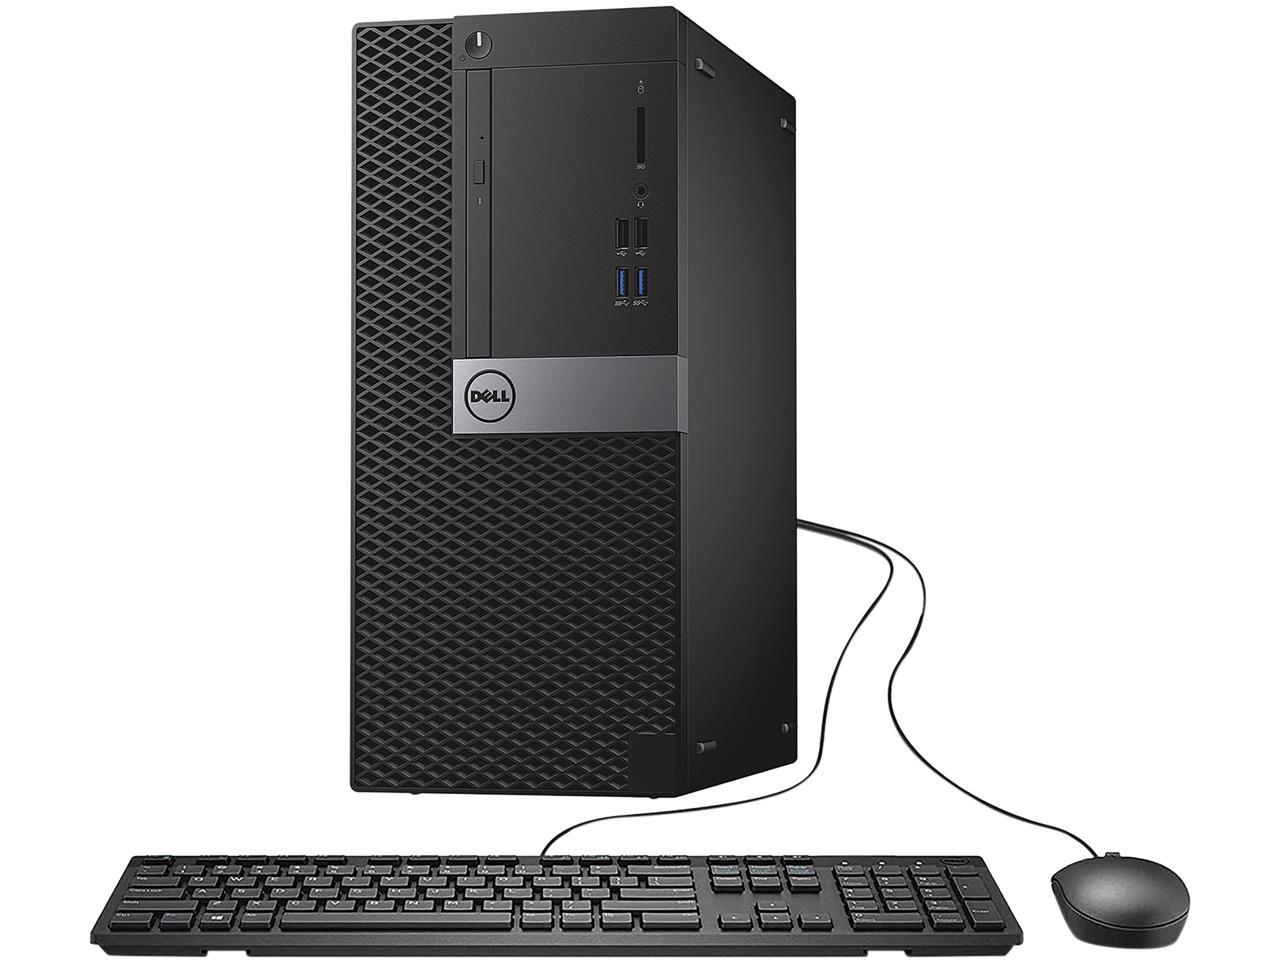 Refurbished: Dell Optiplex 7040 Tower, i7-6700 Quad Core  Ghz, 1TB  SSD, 16GB RAM, 4K UHD 3-Monitor Support, 2x Display Port, HDMI, DVDRW,  Windows 10 Pro, WiFi, Keyboard and Mouse Included 